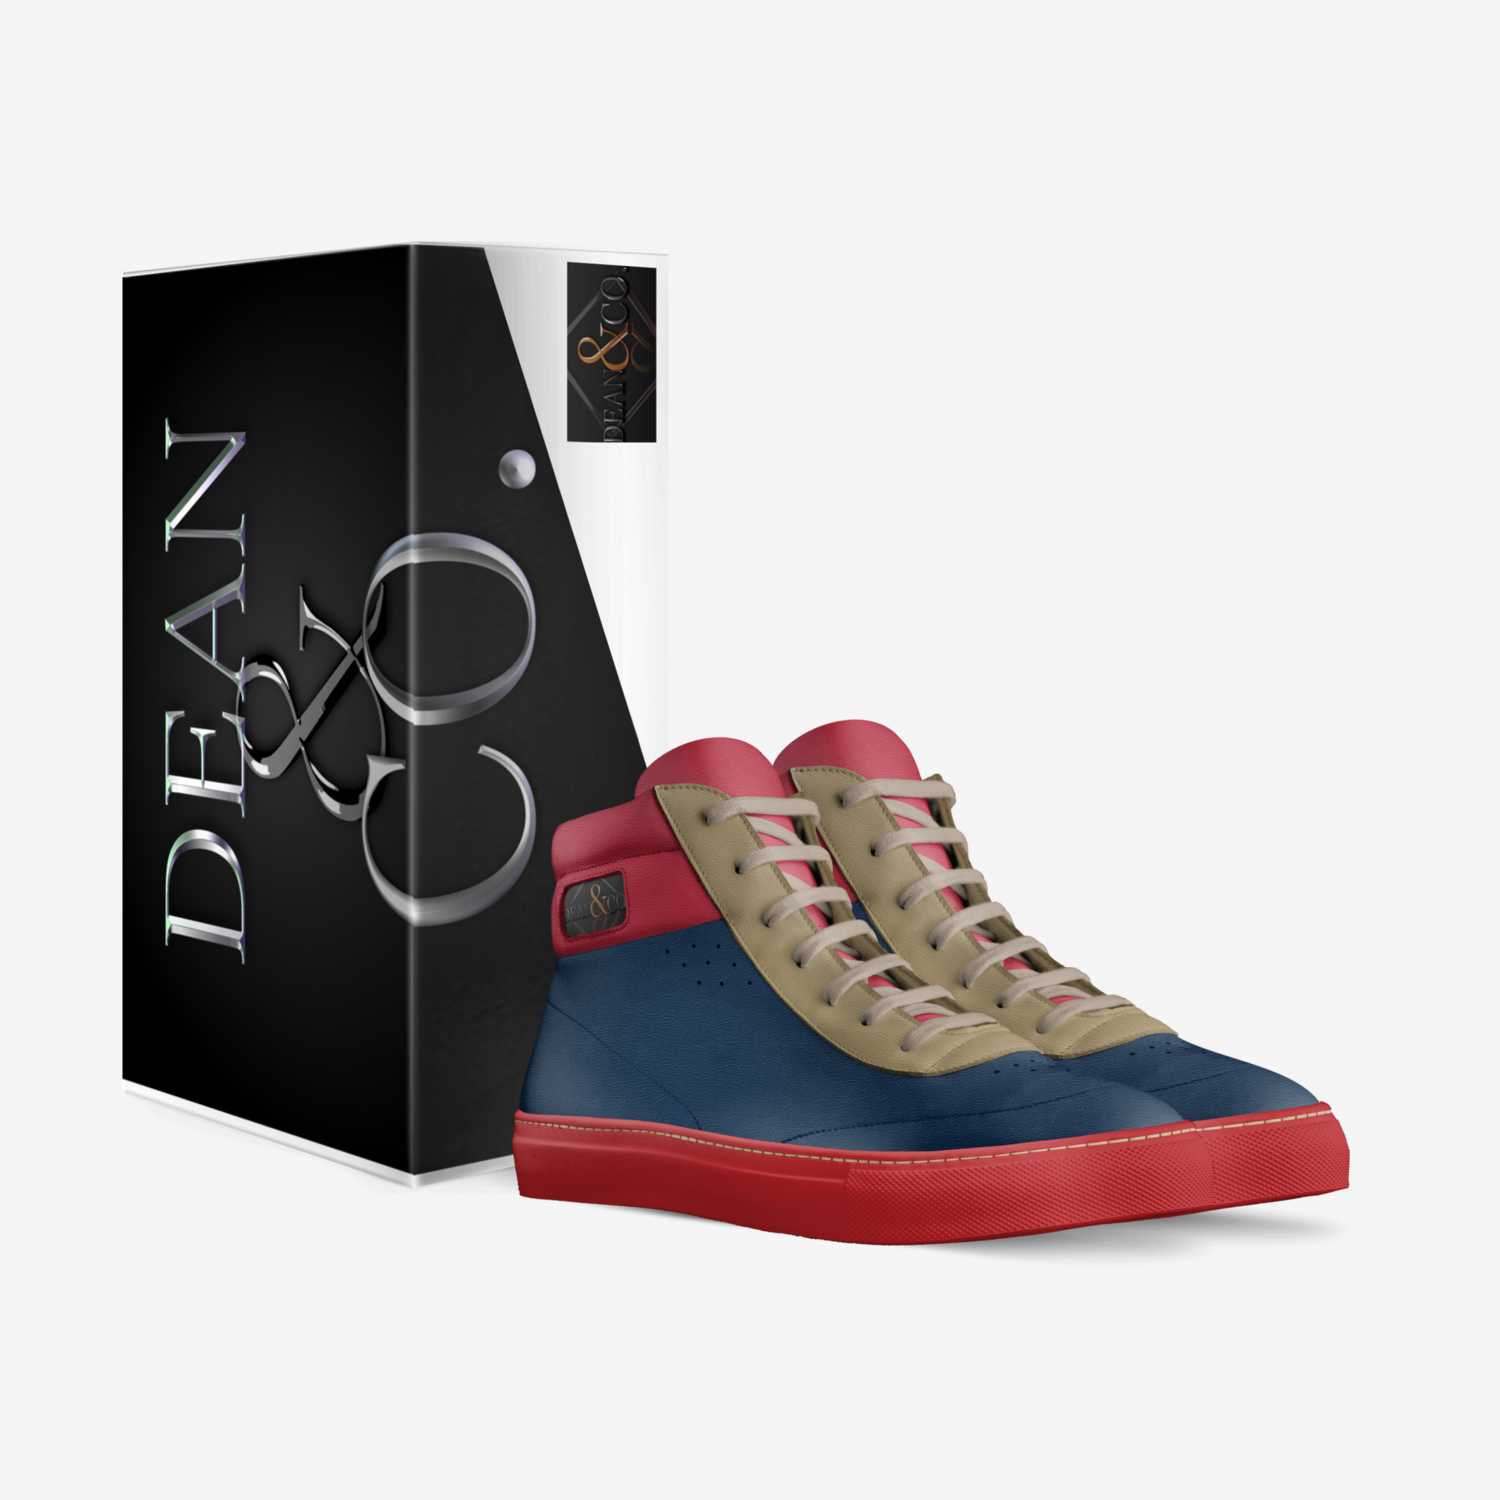 Fres Indigo custom made in Italy shoes by Rondell Dean | Box view